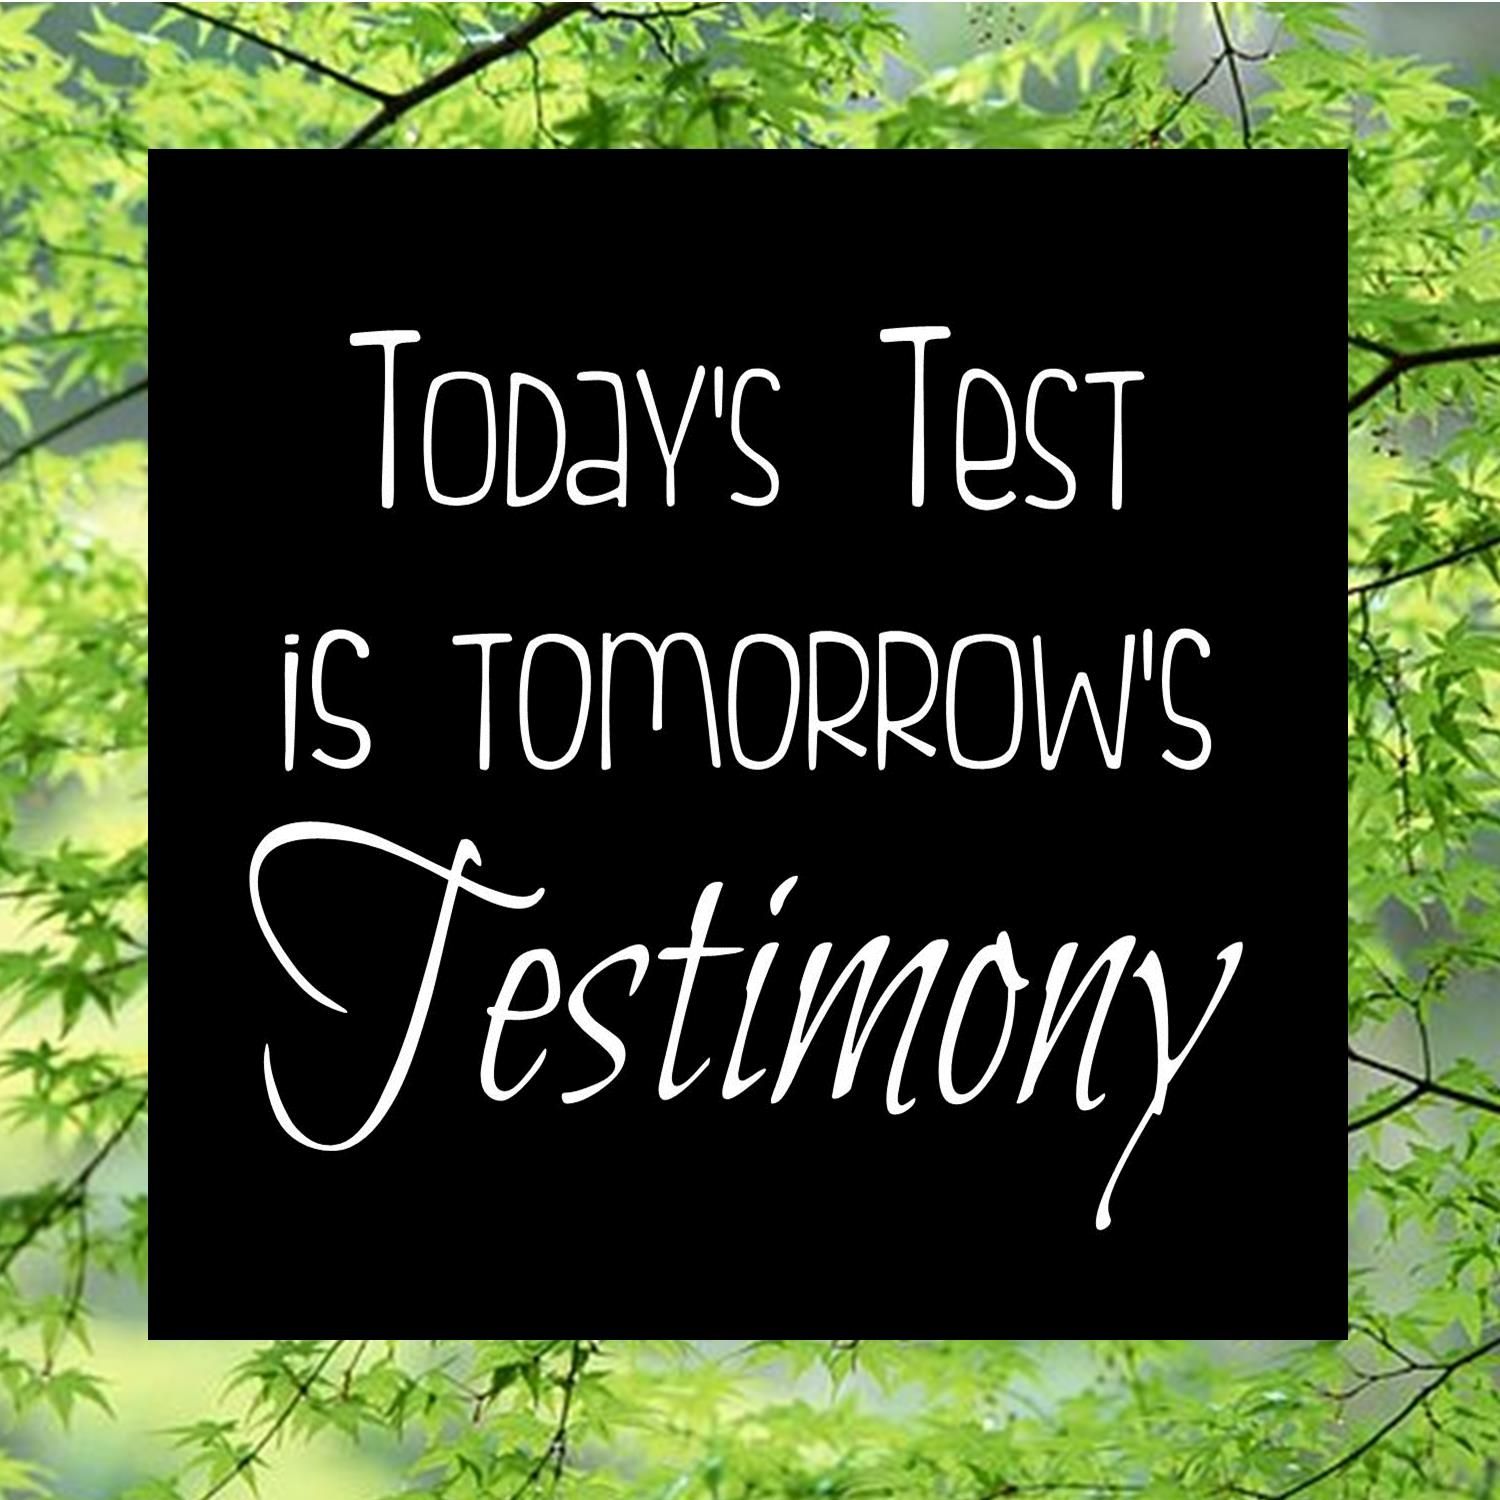 Let your test today be your testimony tomorrow